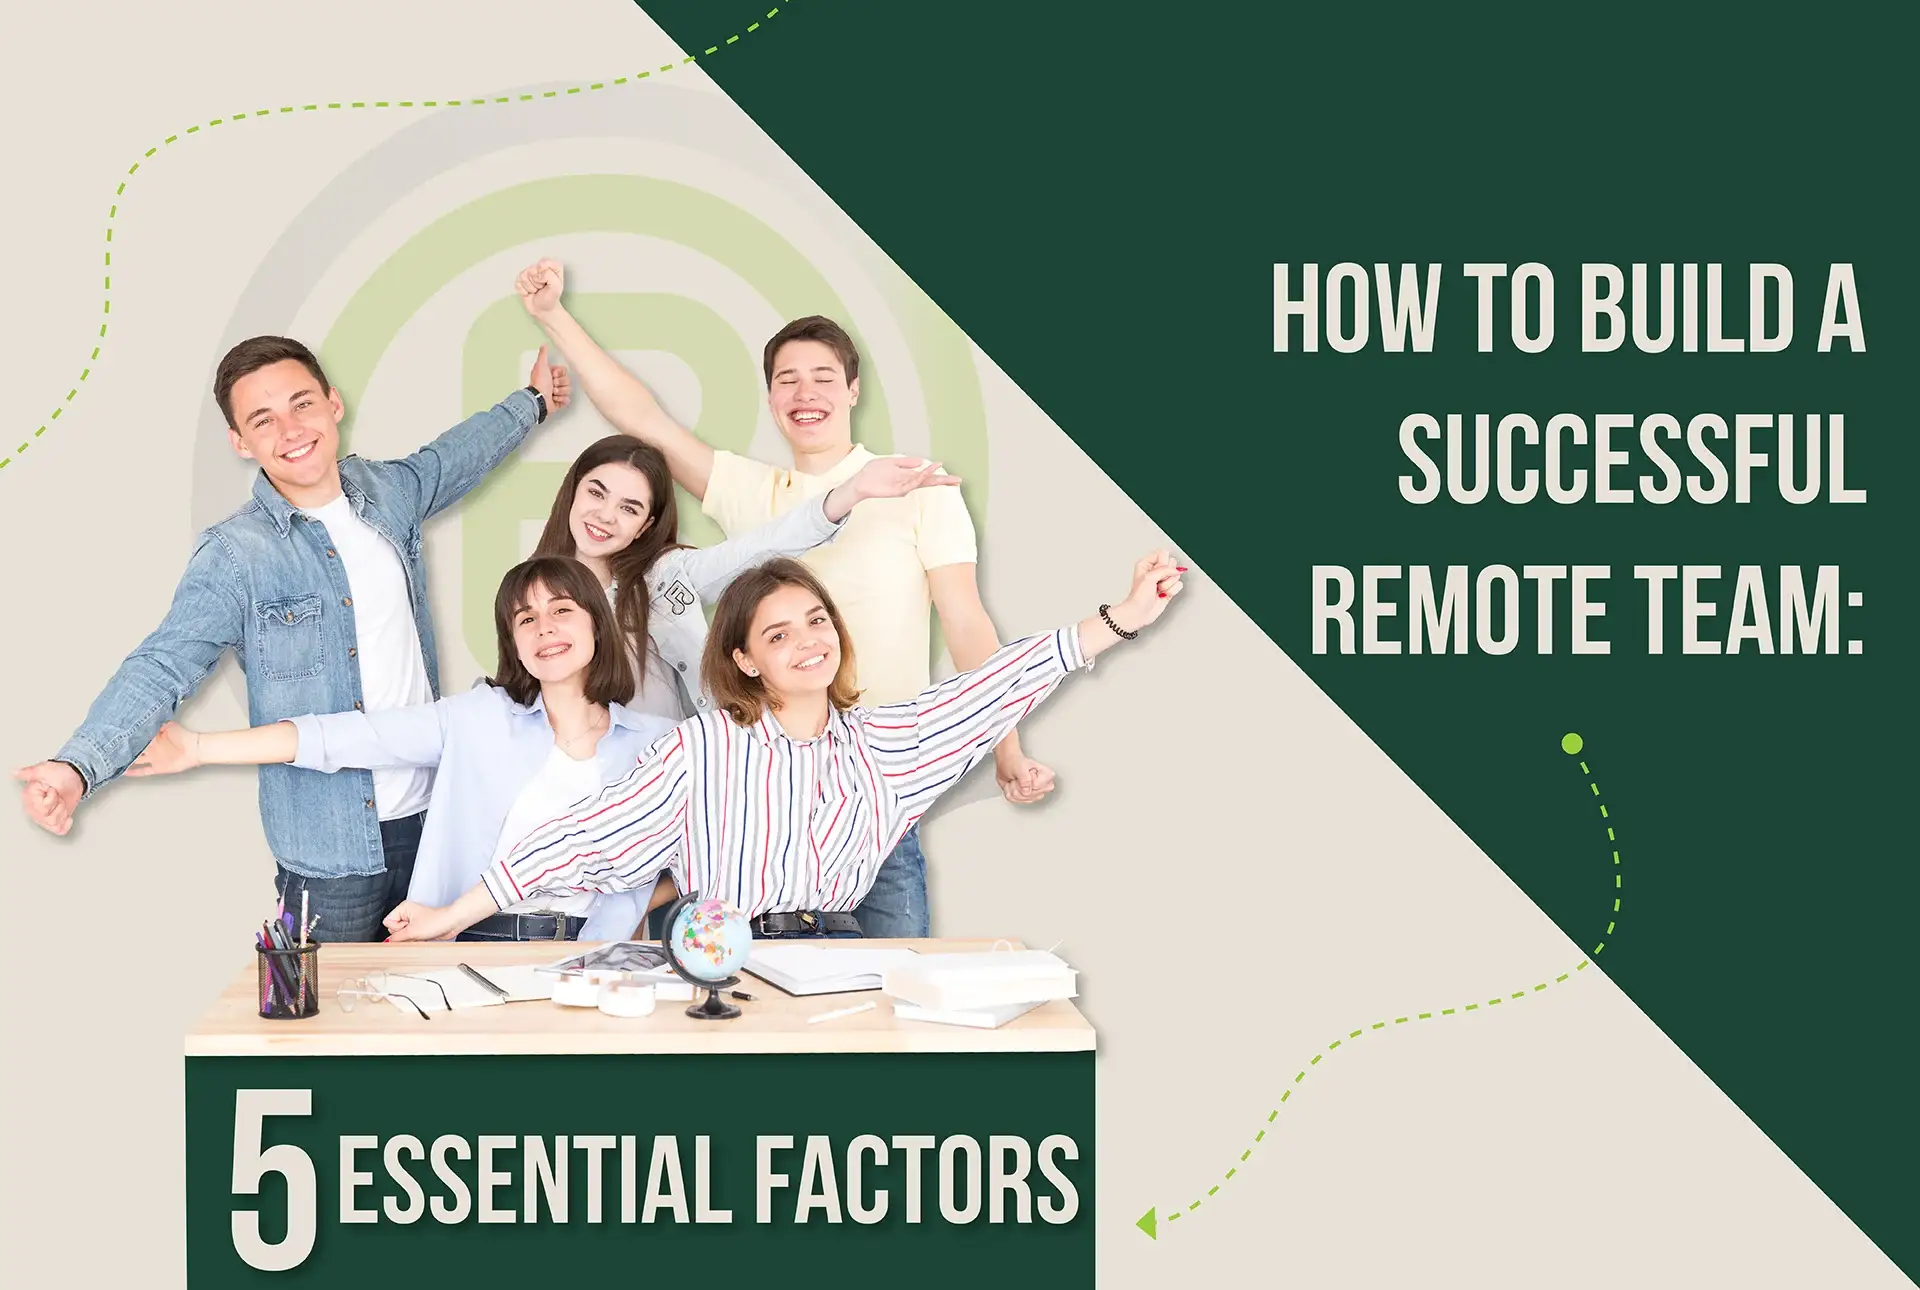 How to Build a Successful Remote Team: 5 Essential Factors